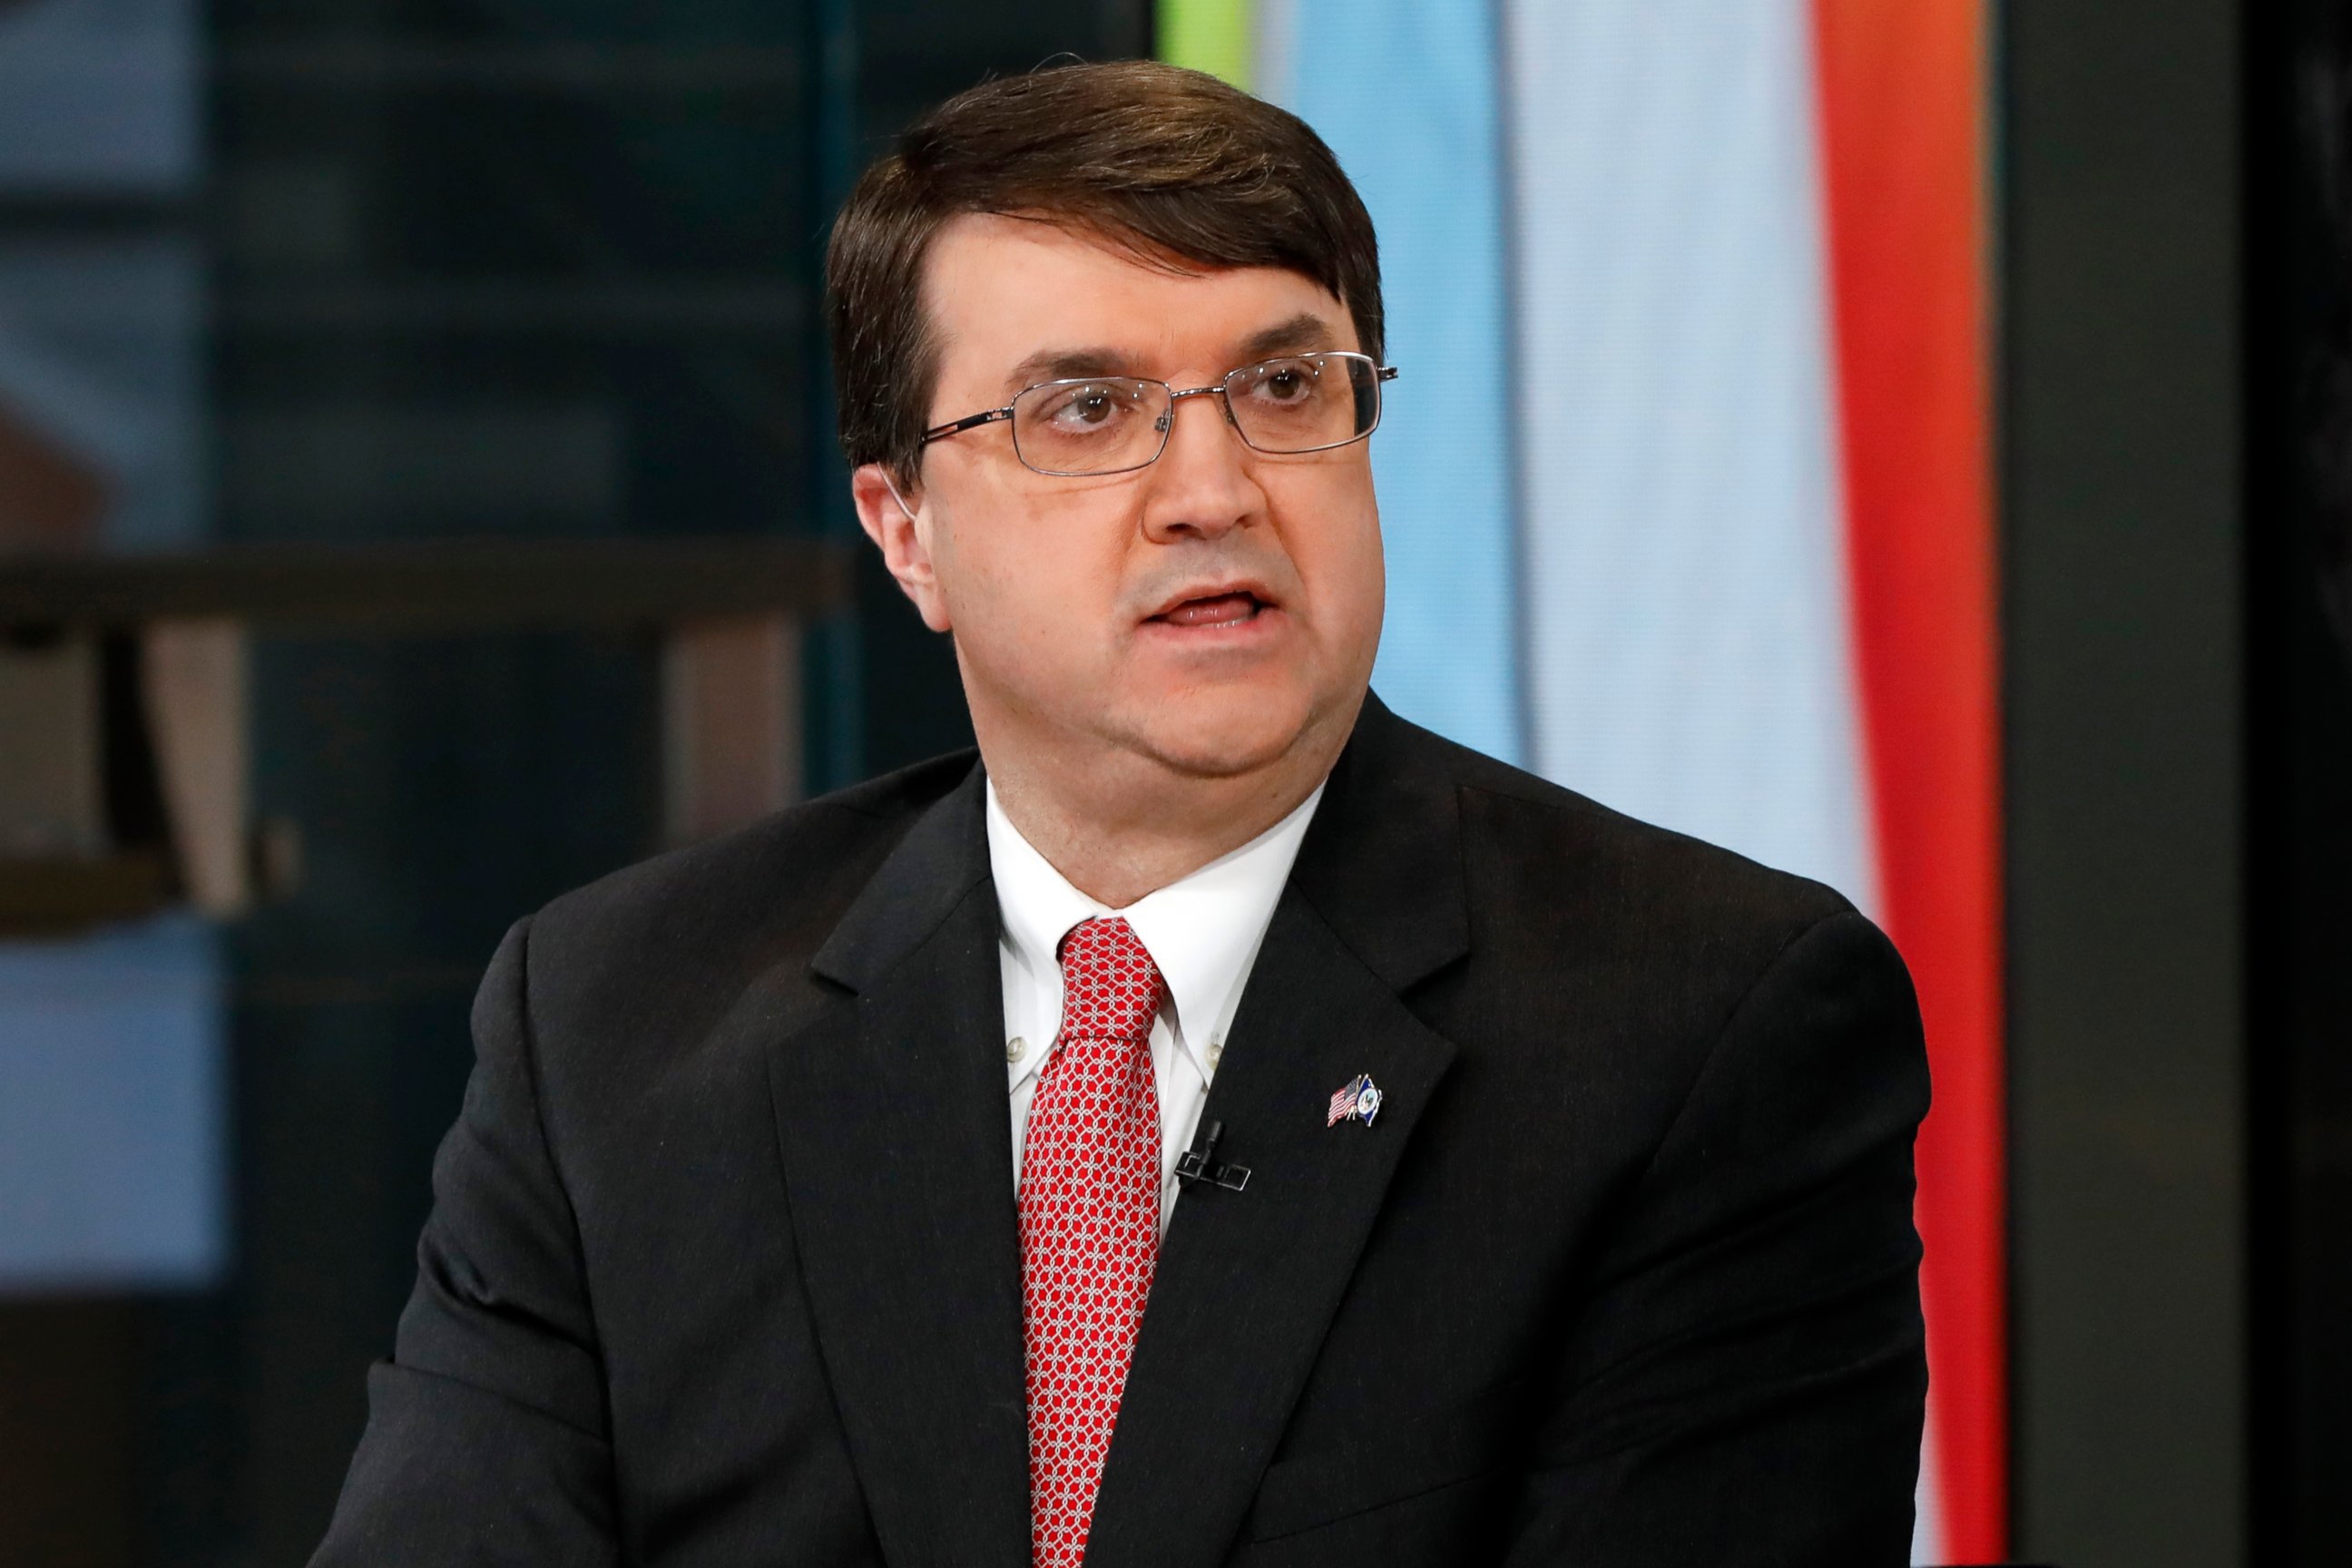 PHOTO: U.S. Secretary of Veterans Affairs Robert Wilkie appears on the Fox News Channel's "Outnumbered Overtime with Harris Faulkner," in New York, Thursday, May 23, 2019.